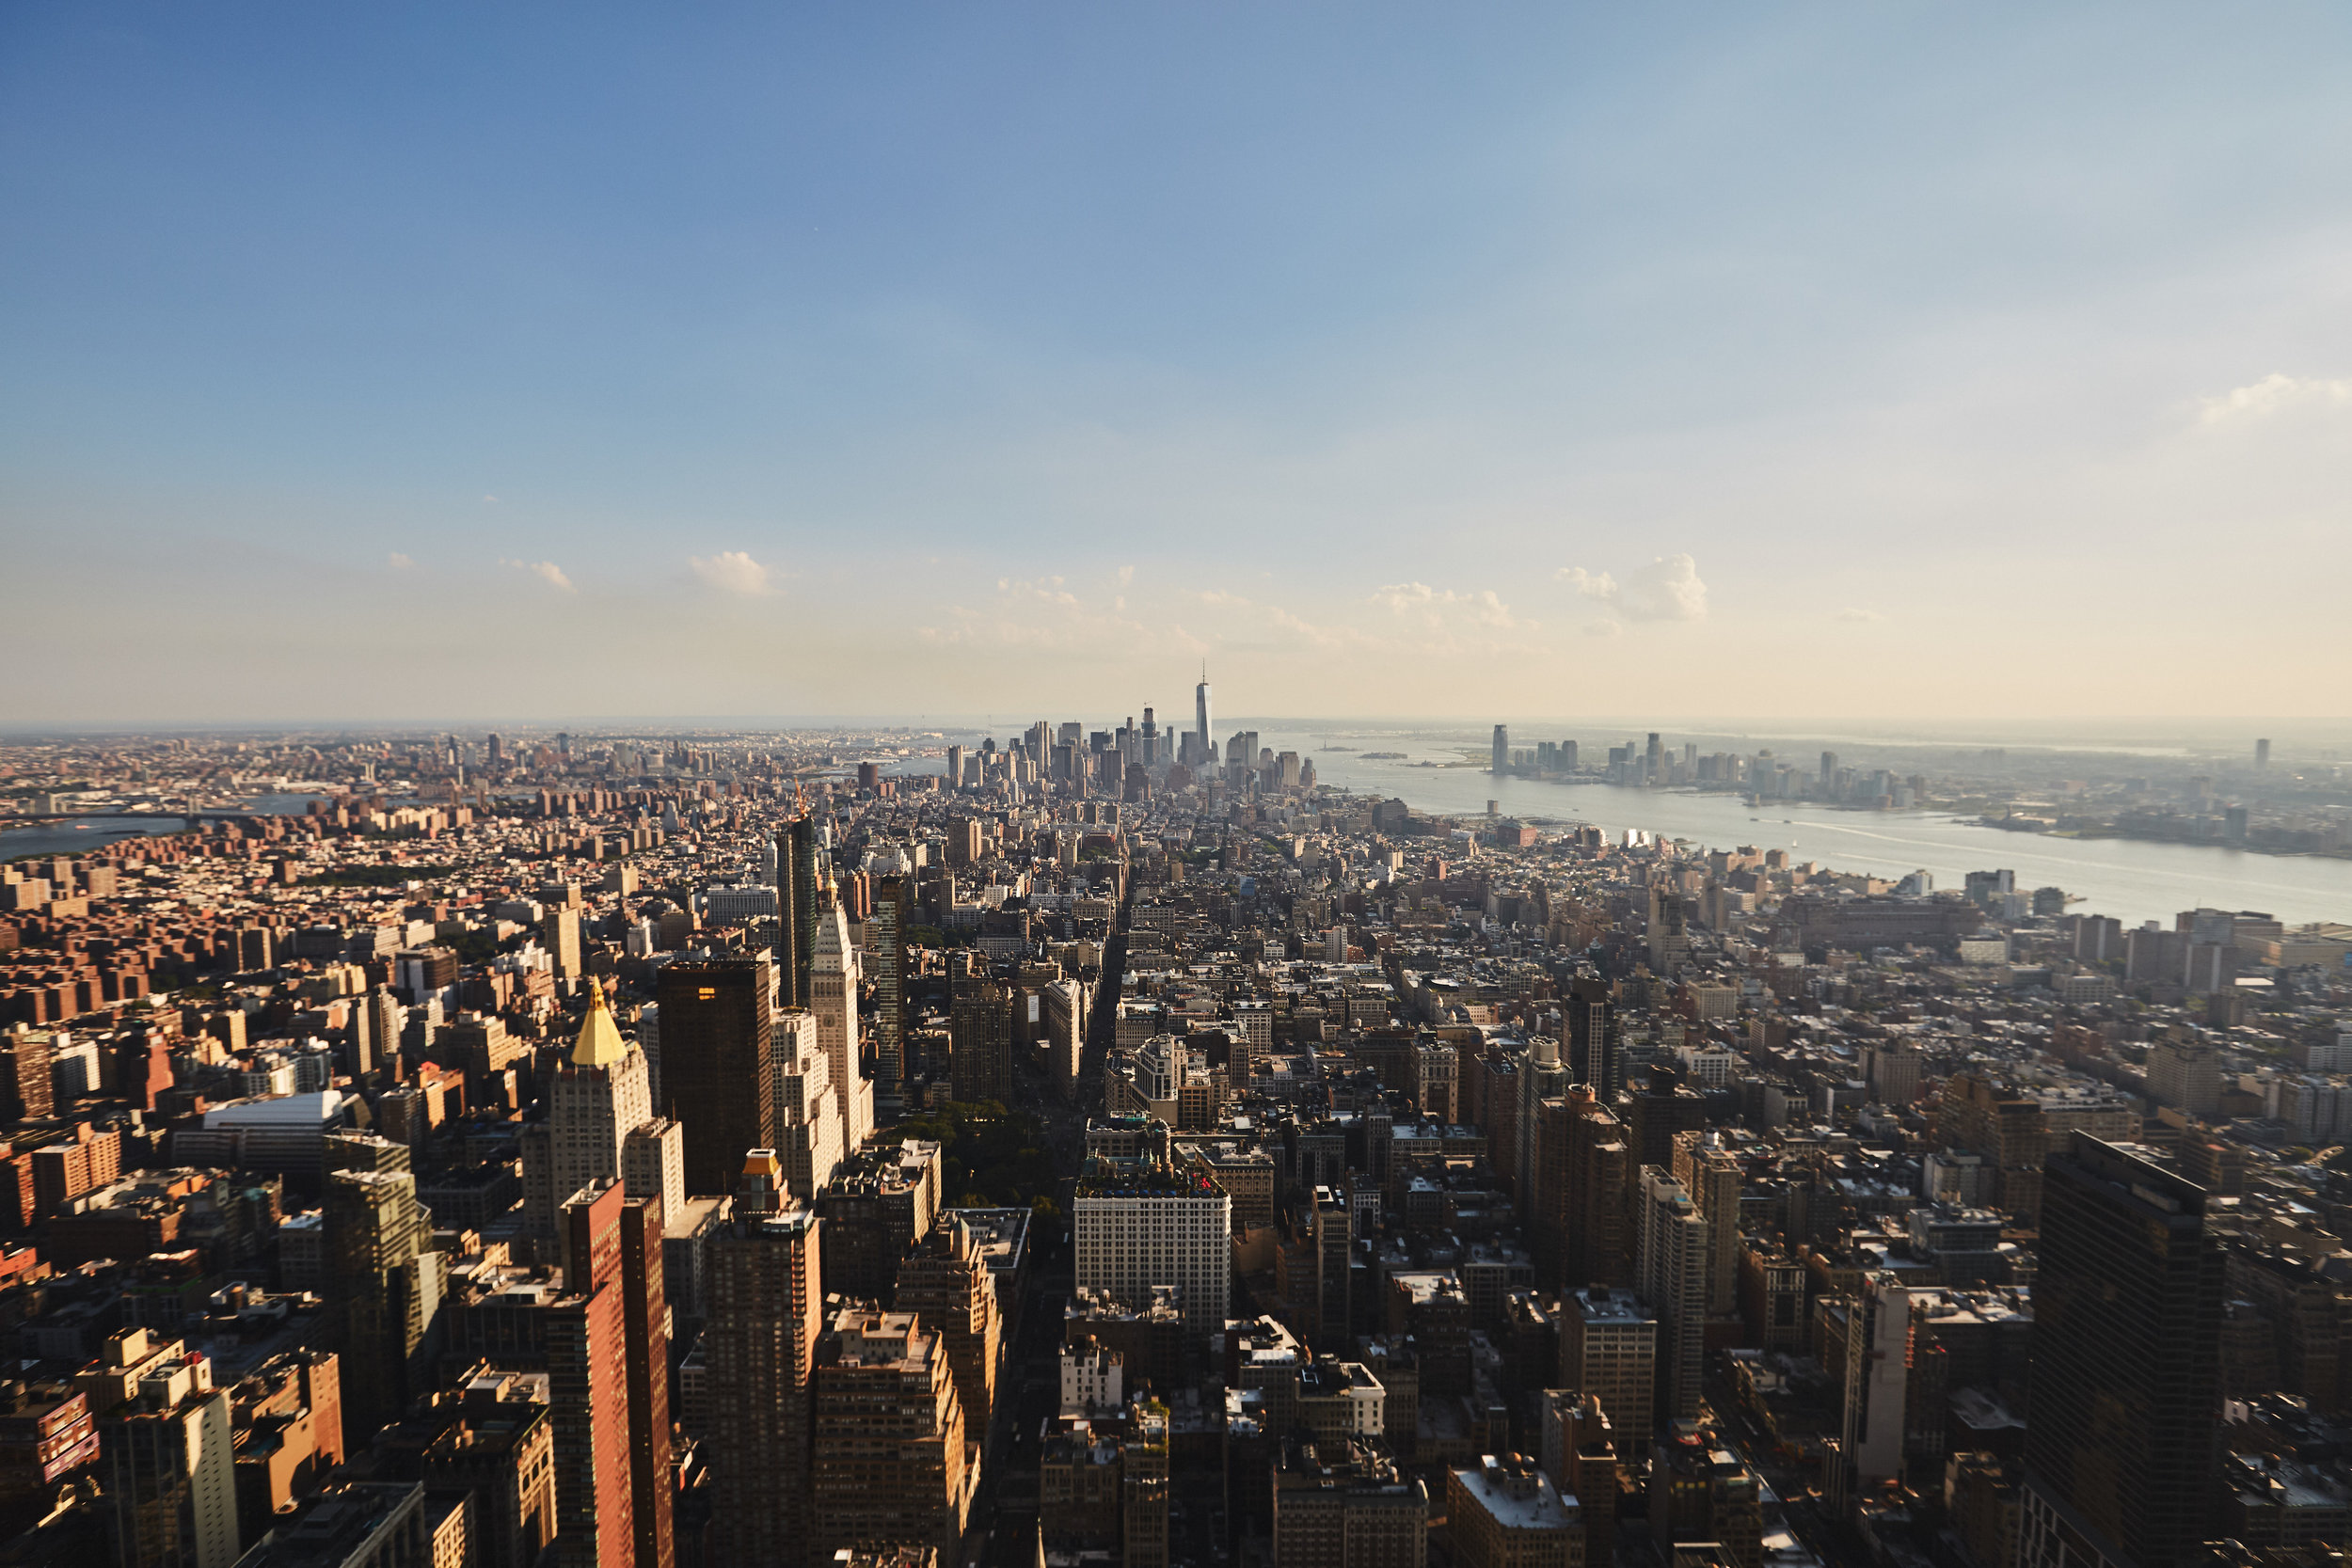 Empire_State_Building - 009 1.jpg